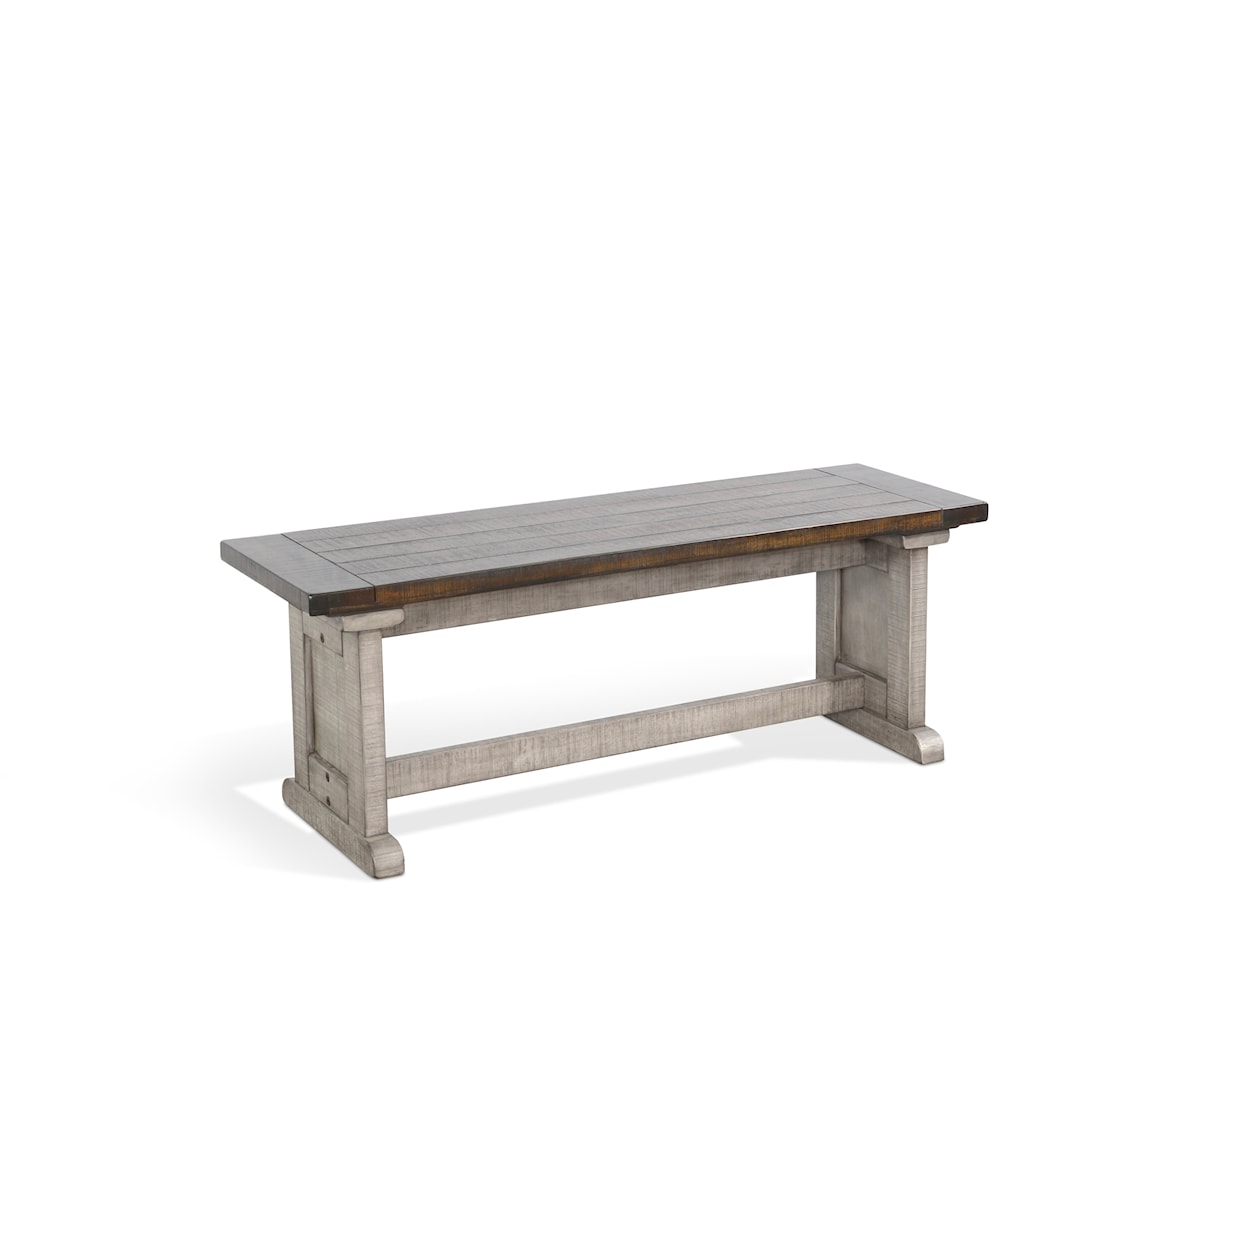 Sunny Designs Homestead Hills Side Bench with Wood Seat